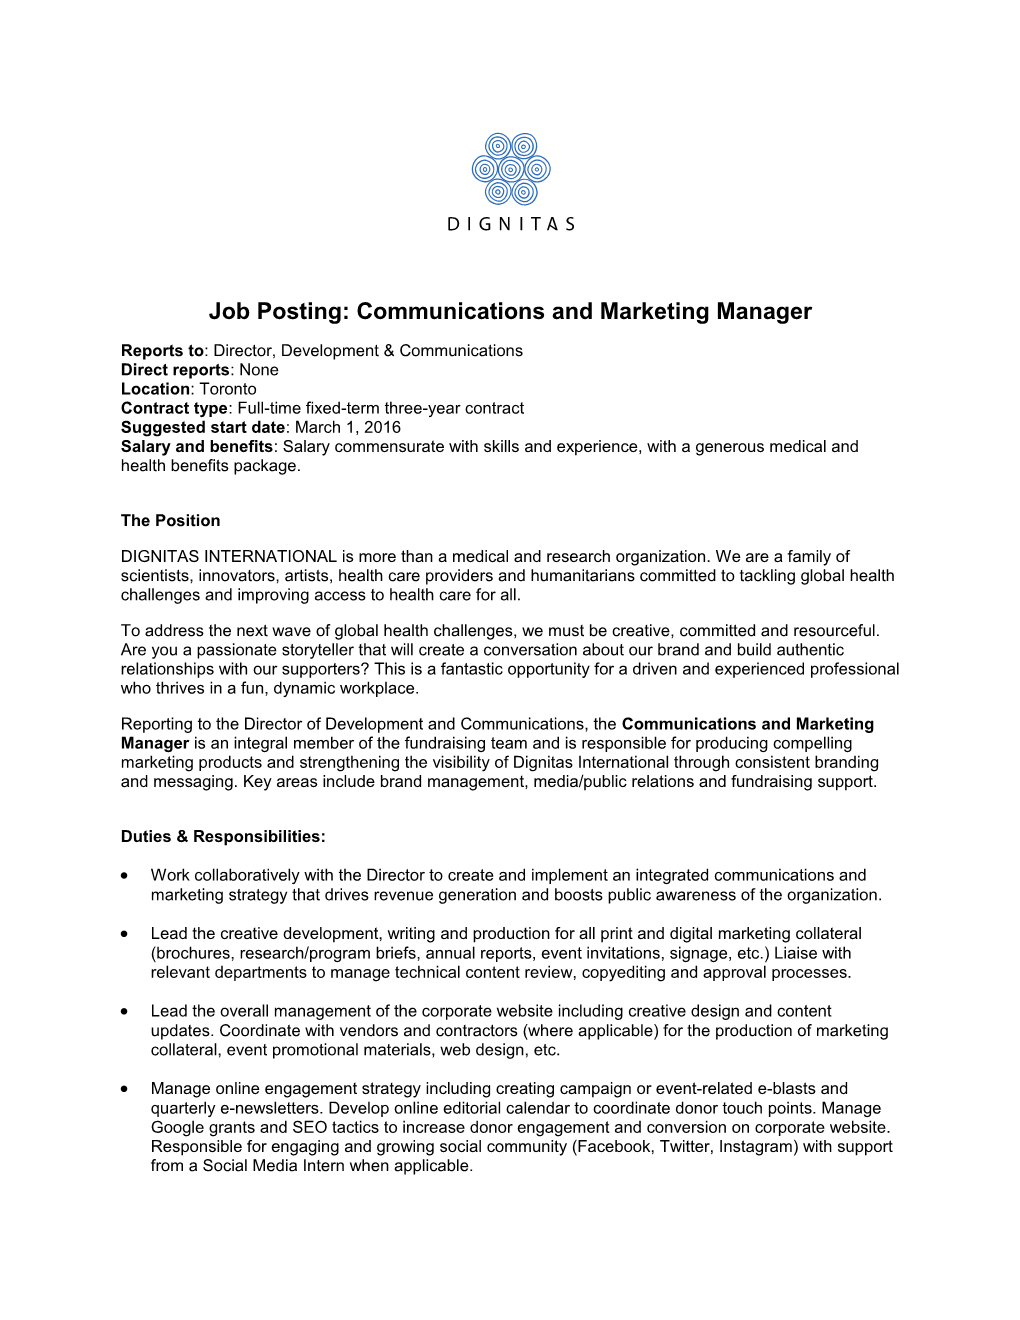 Job Posting: Communications and Marketing Manager